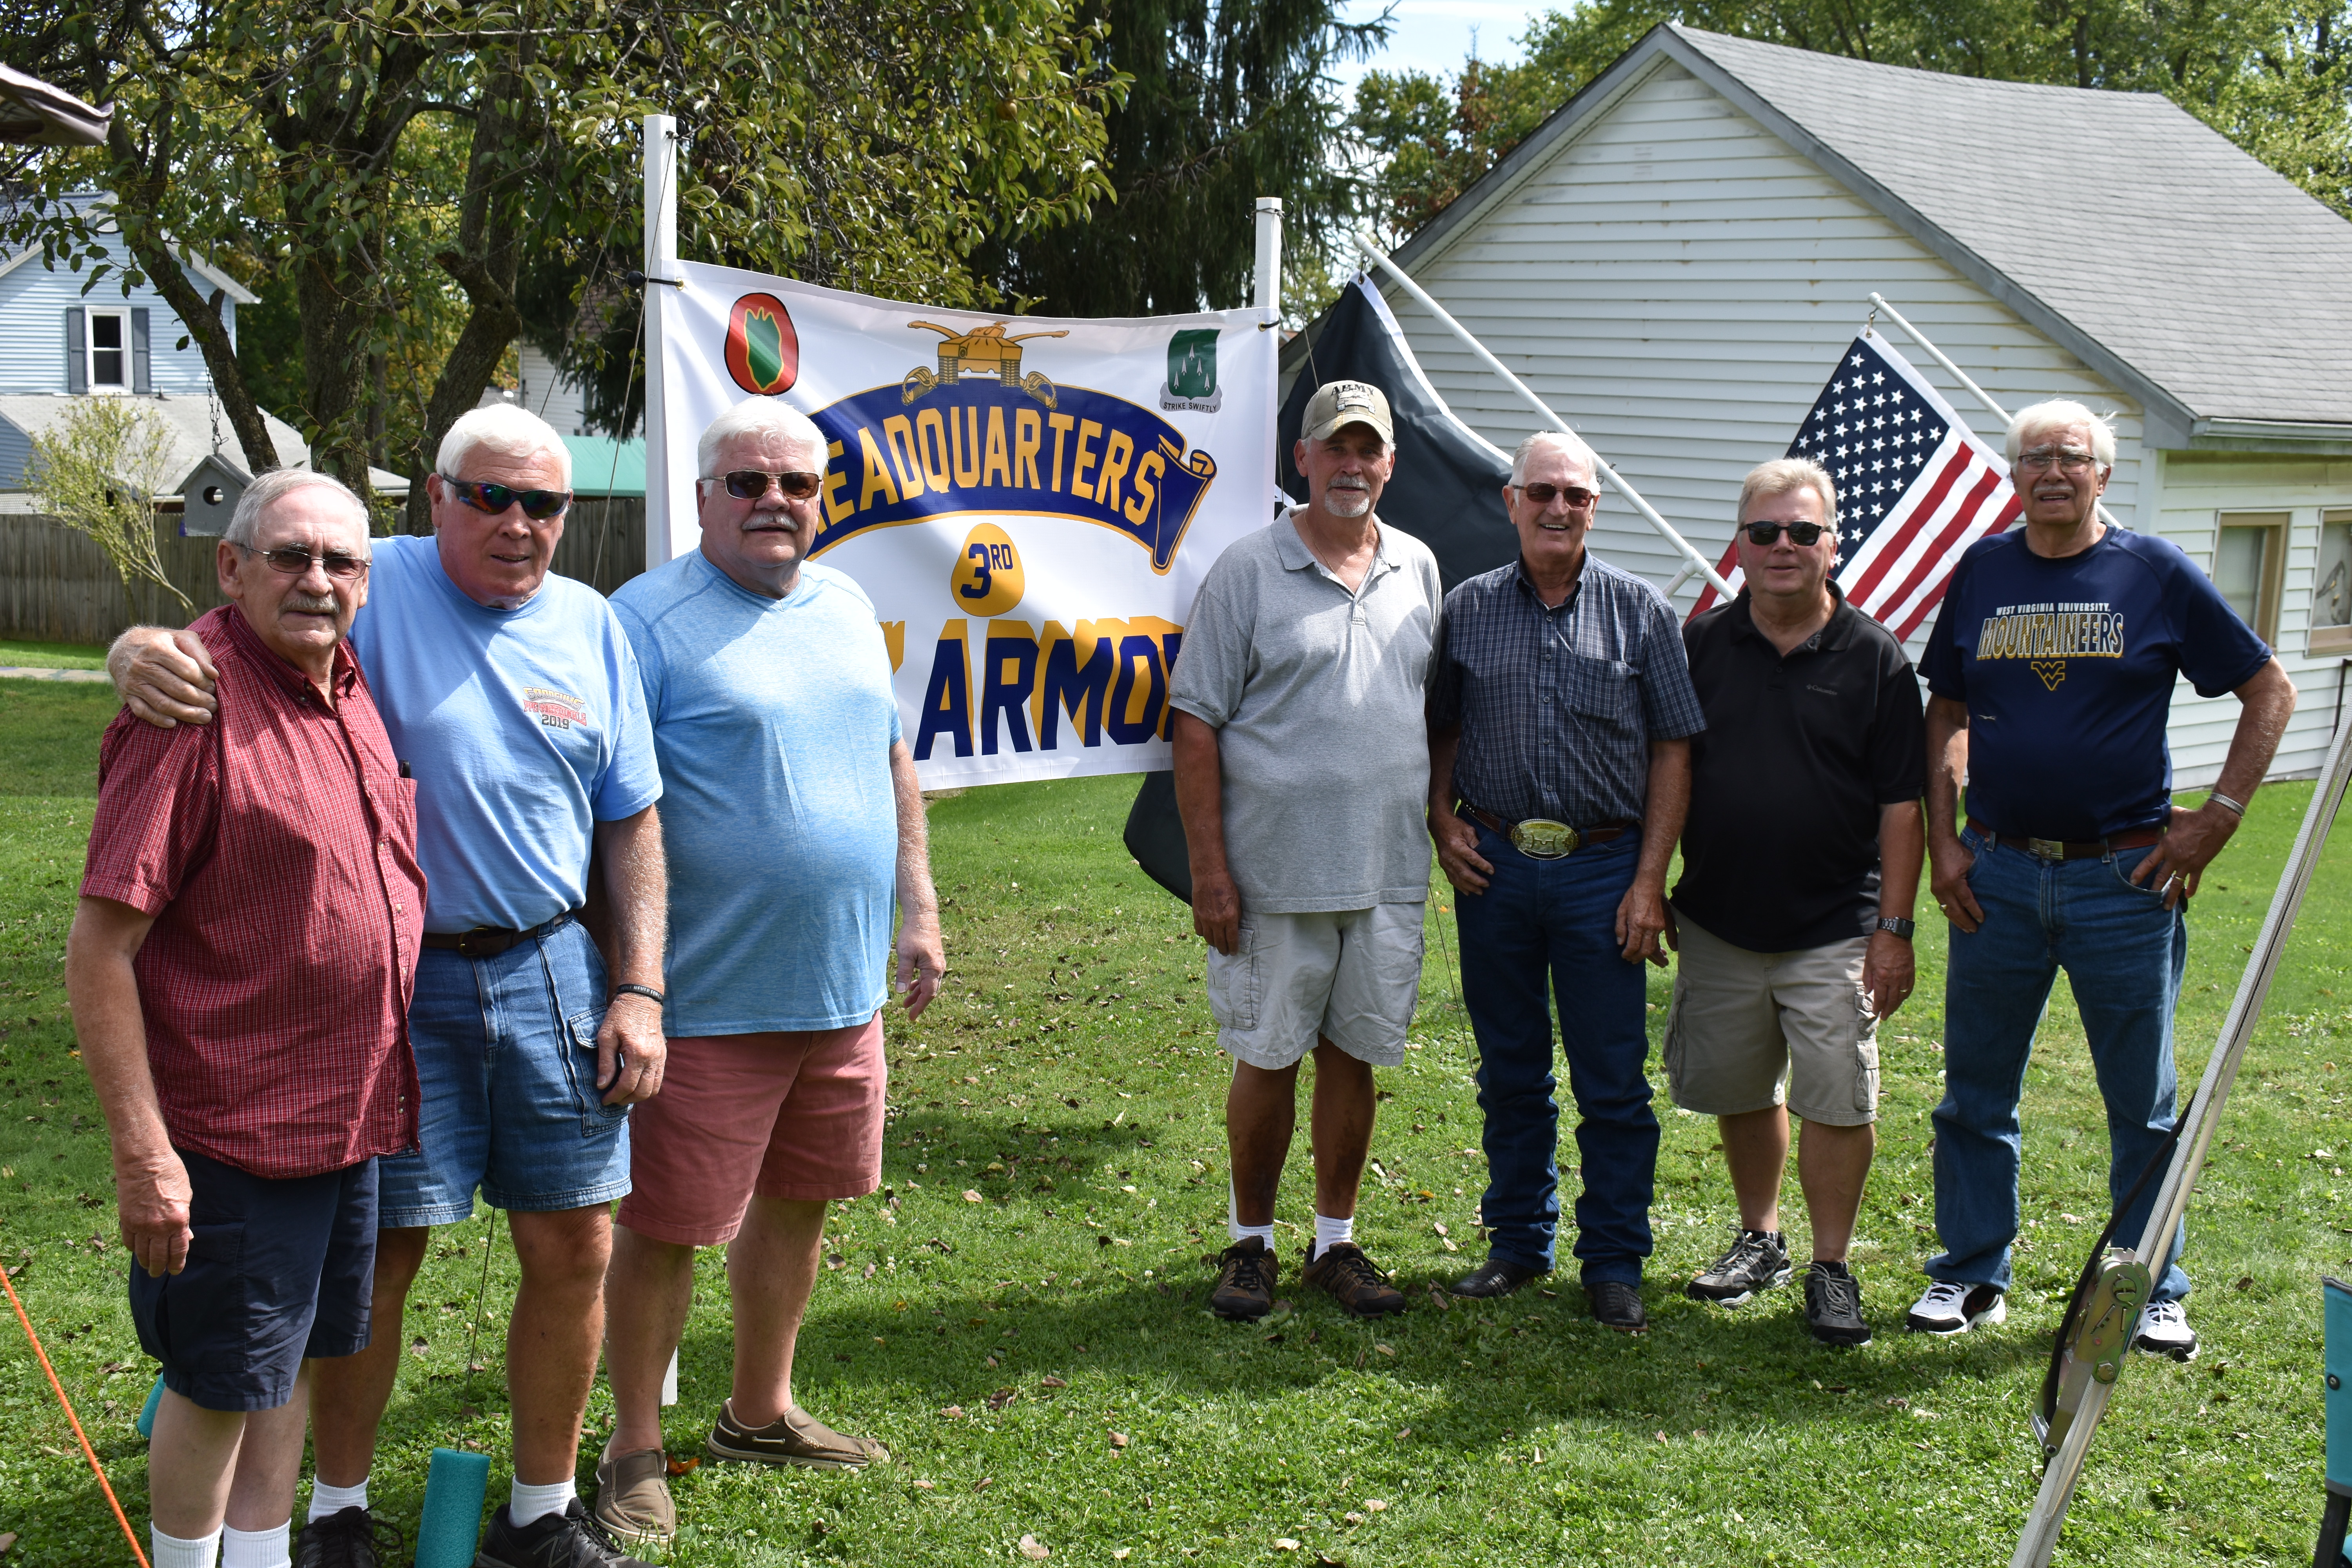 Vets from the Army's 70th Armored Division, photo above, gathered for a reunion in Masury. They are, from left, Louie Fejes, Bill Ehrsam, Charles Stafford, Charles Dobbins, Lloyd Eggleston, Gary Eagle and Robert Elza.